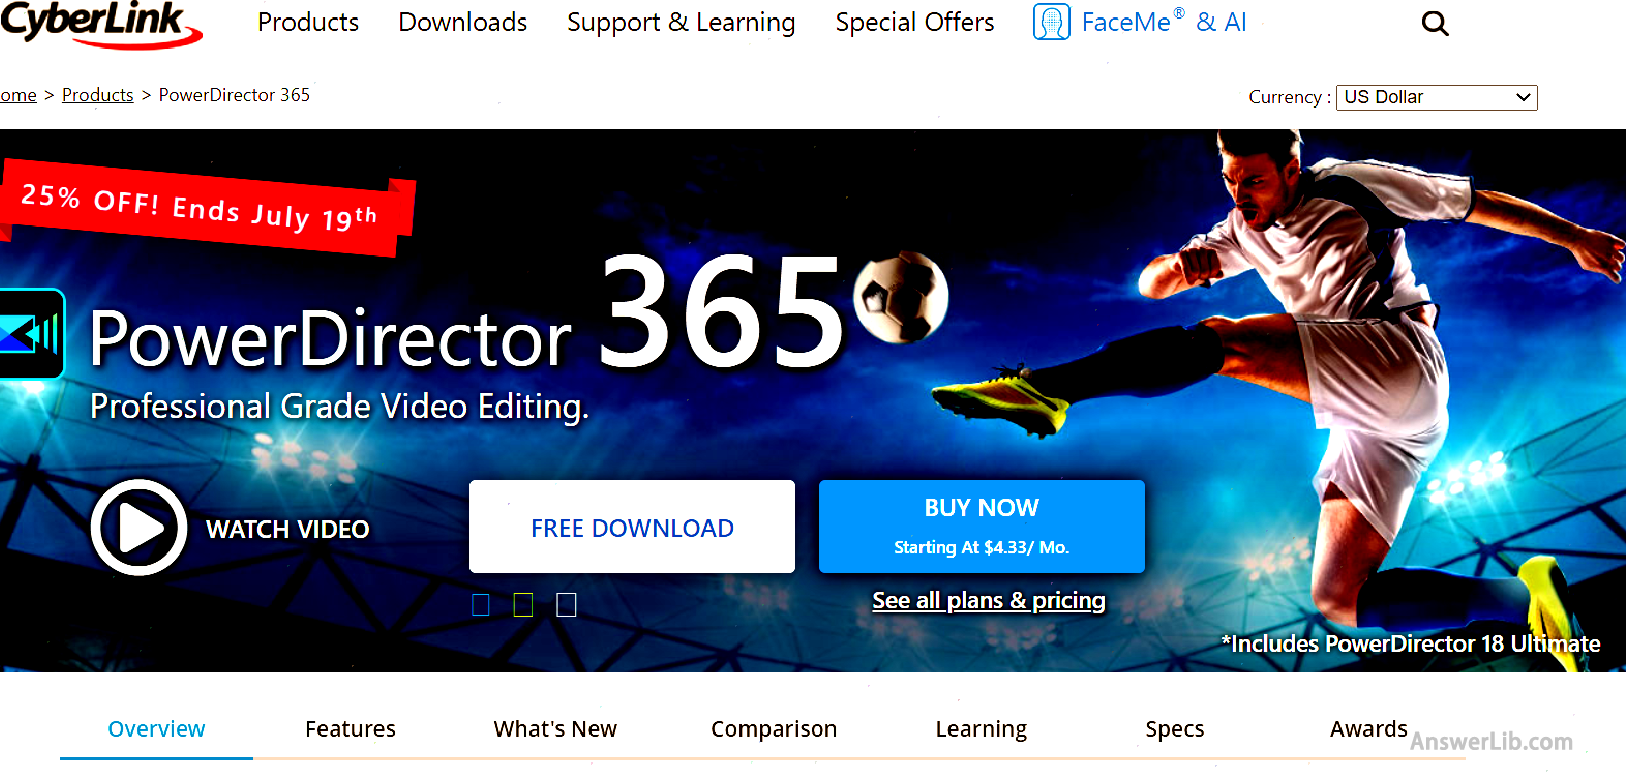 Video editing software suitable for making movie effects: Cyberlink PowerDirector